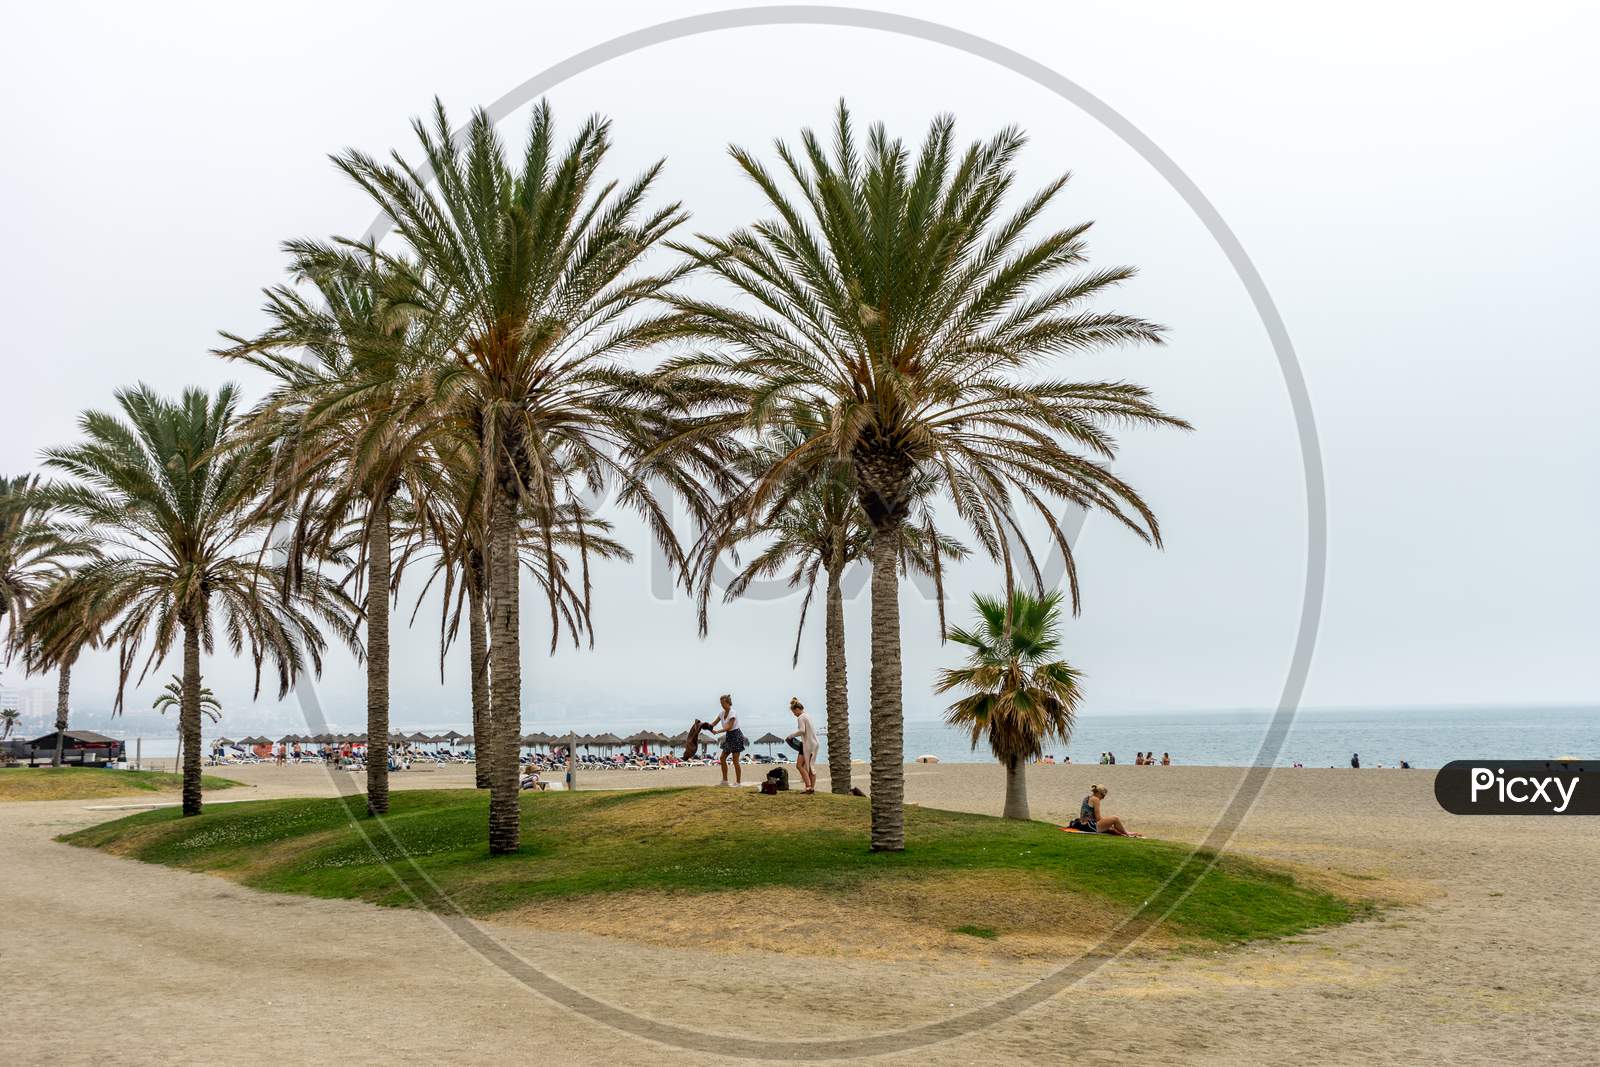 Tall Palm Trees Along The Malaguera Beach With Ocean In The Background In Malaga, Spain, Europe